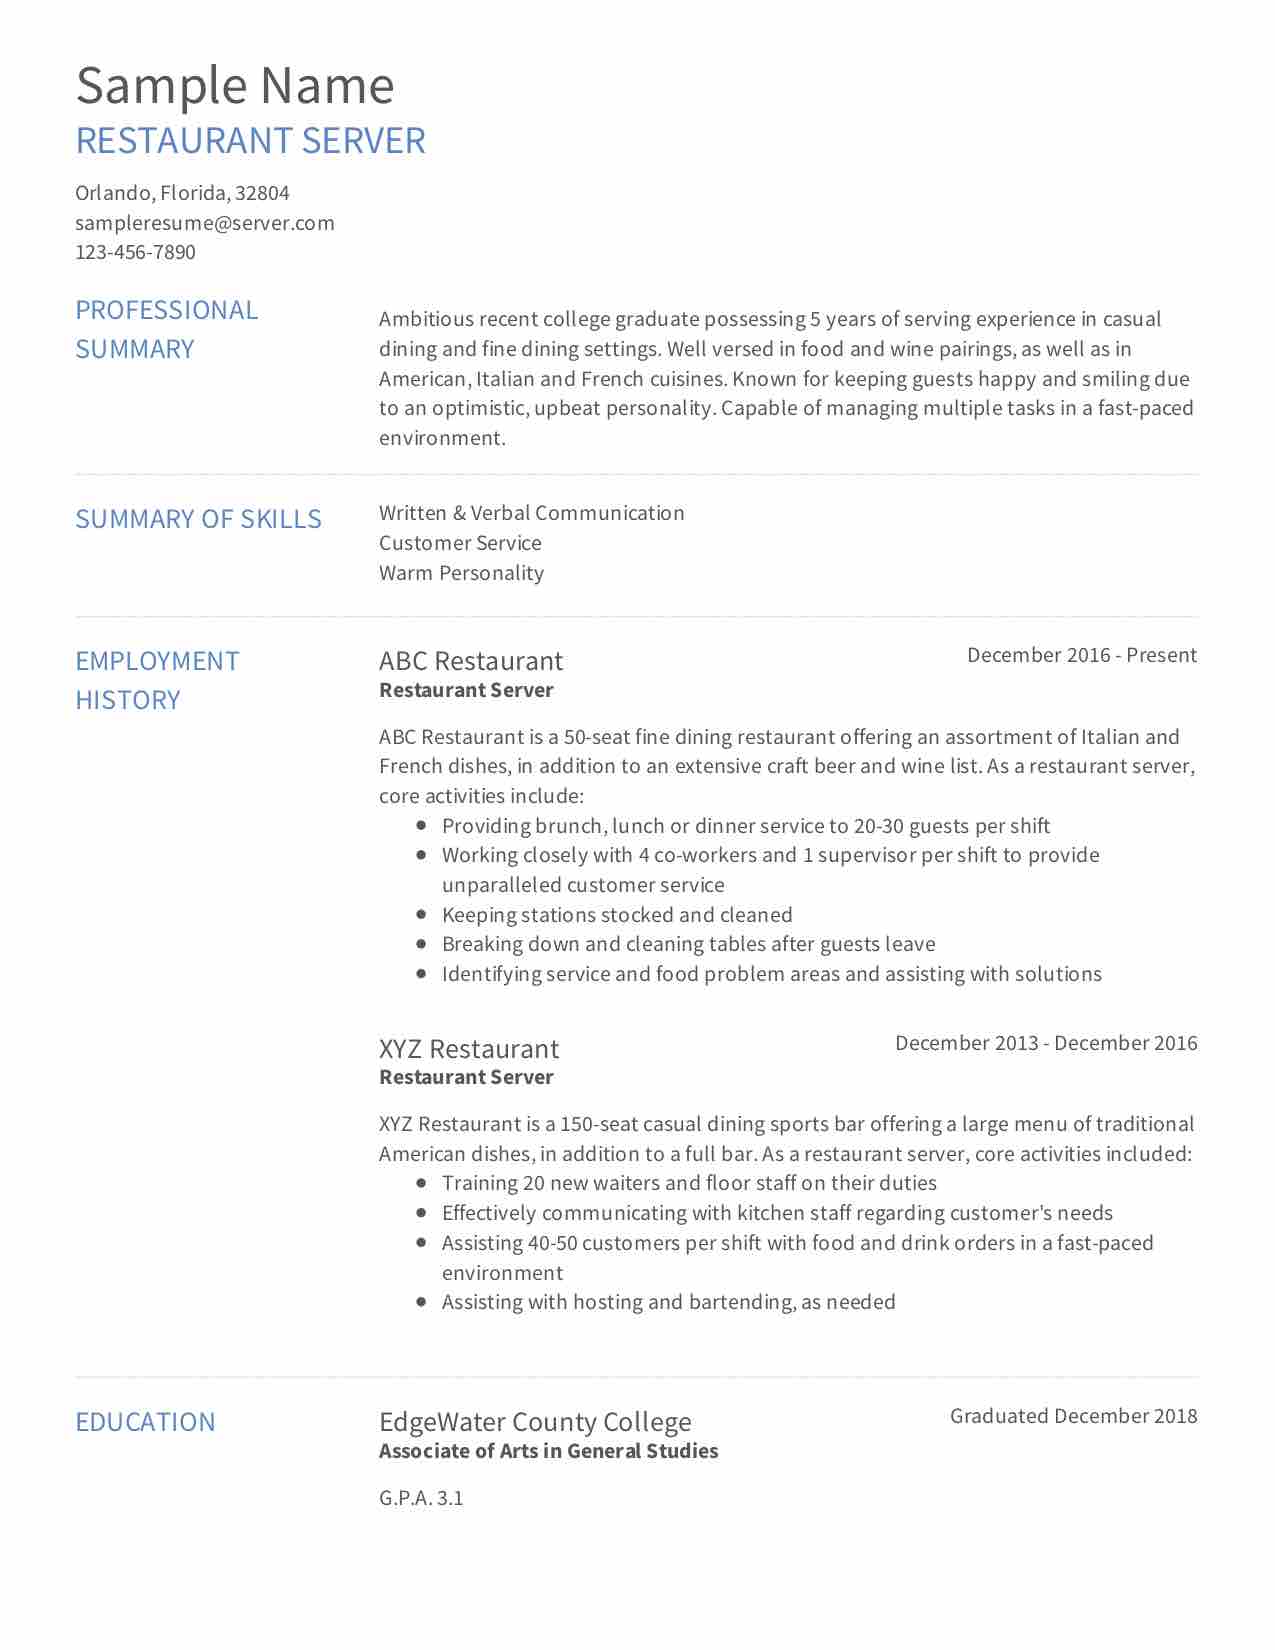 resume examples for server jobs